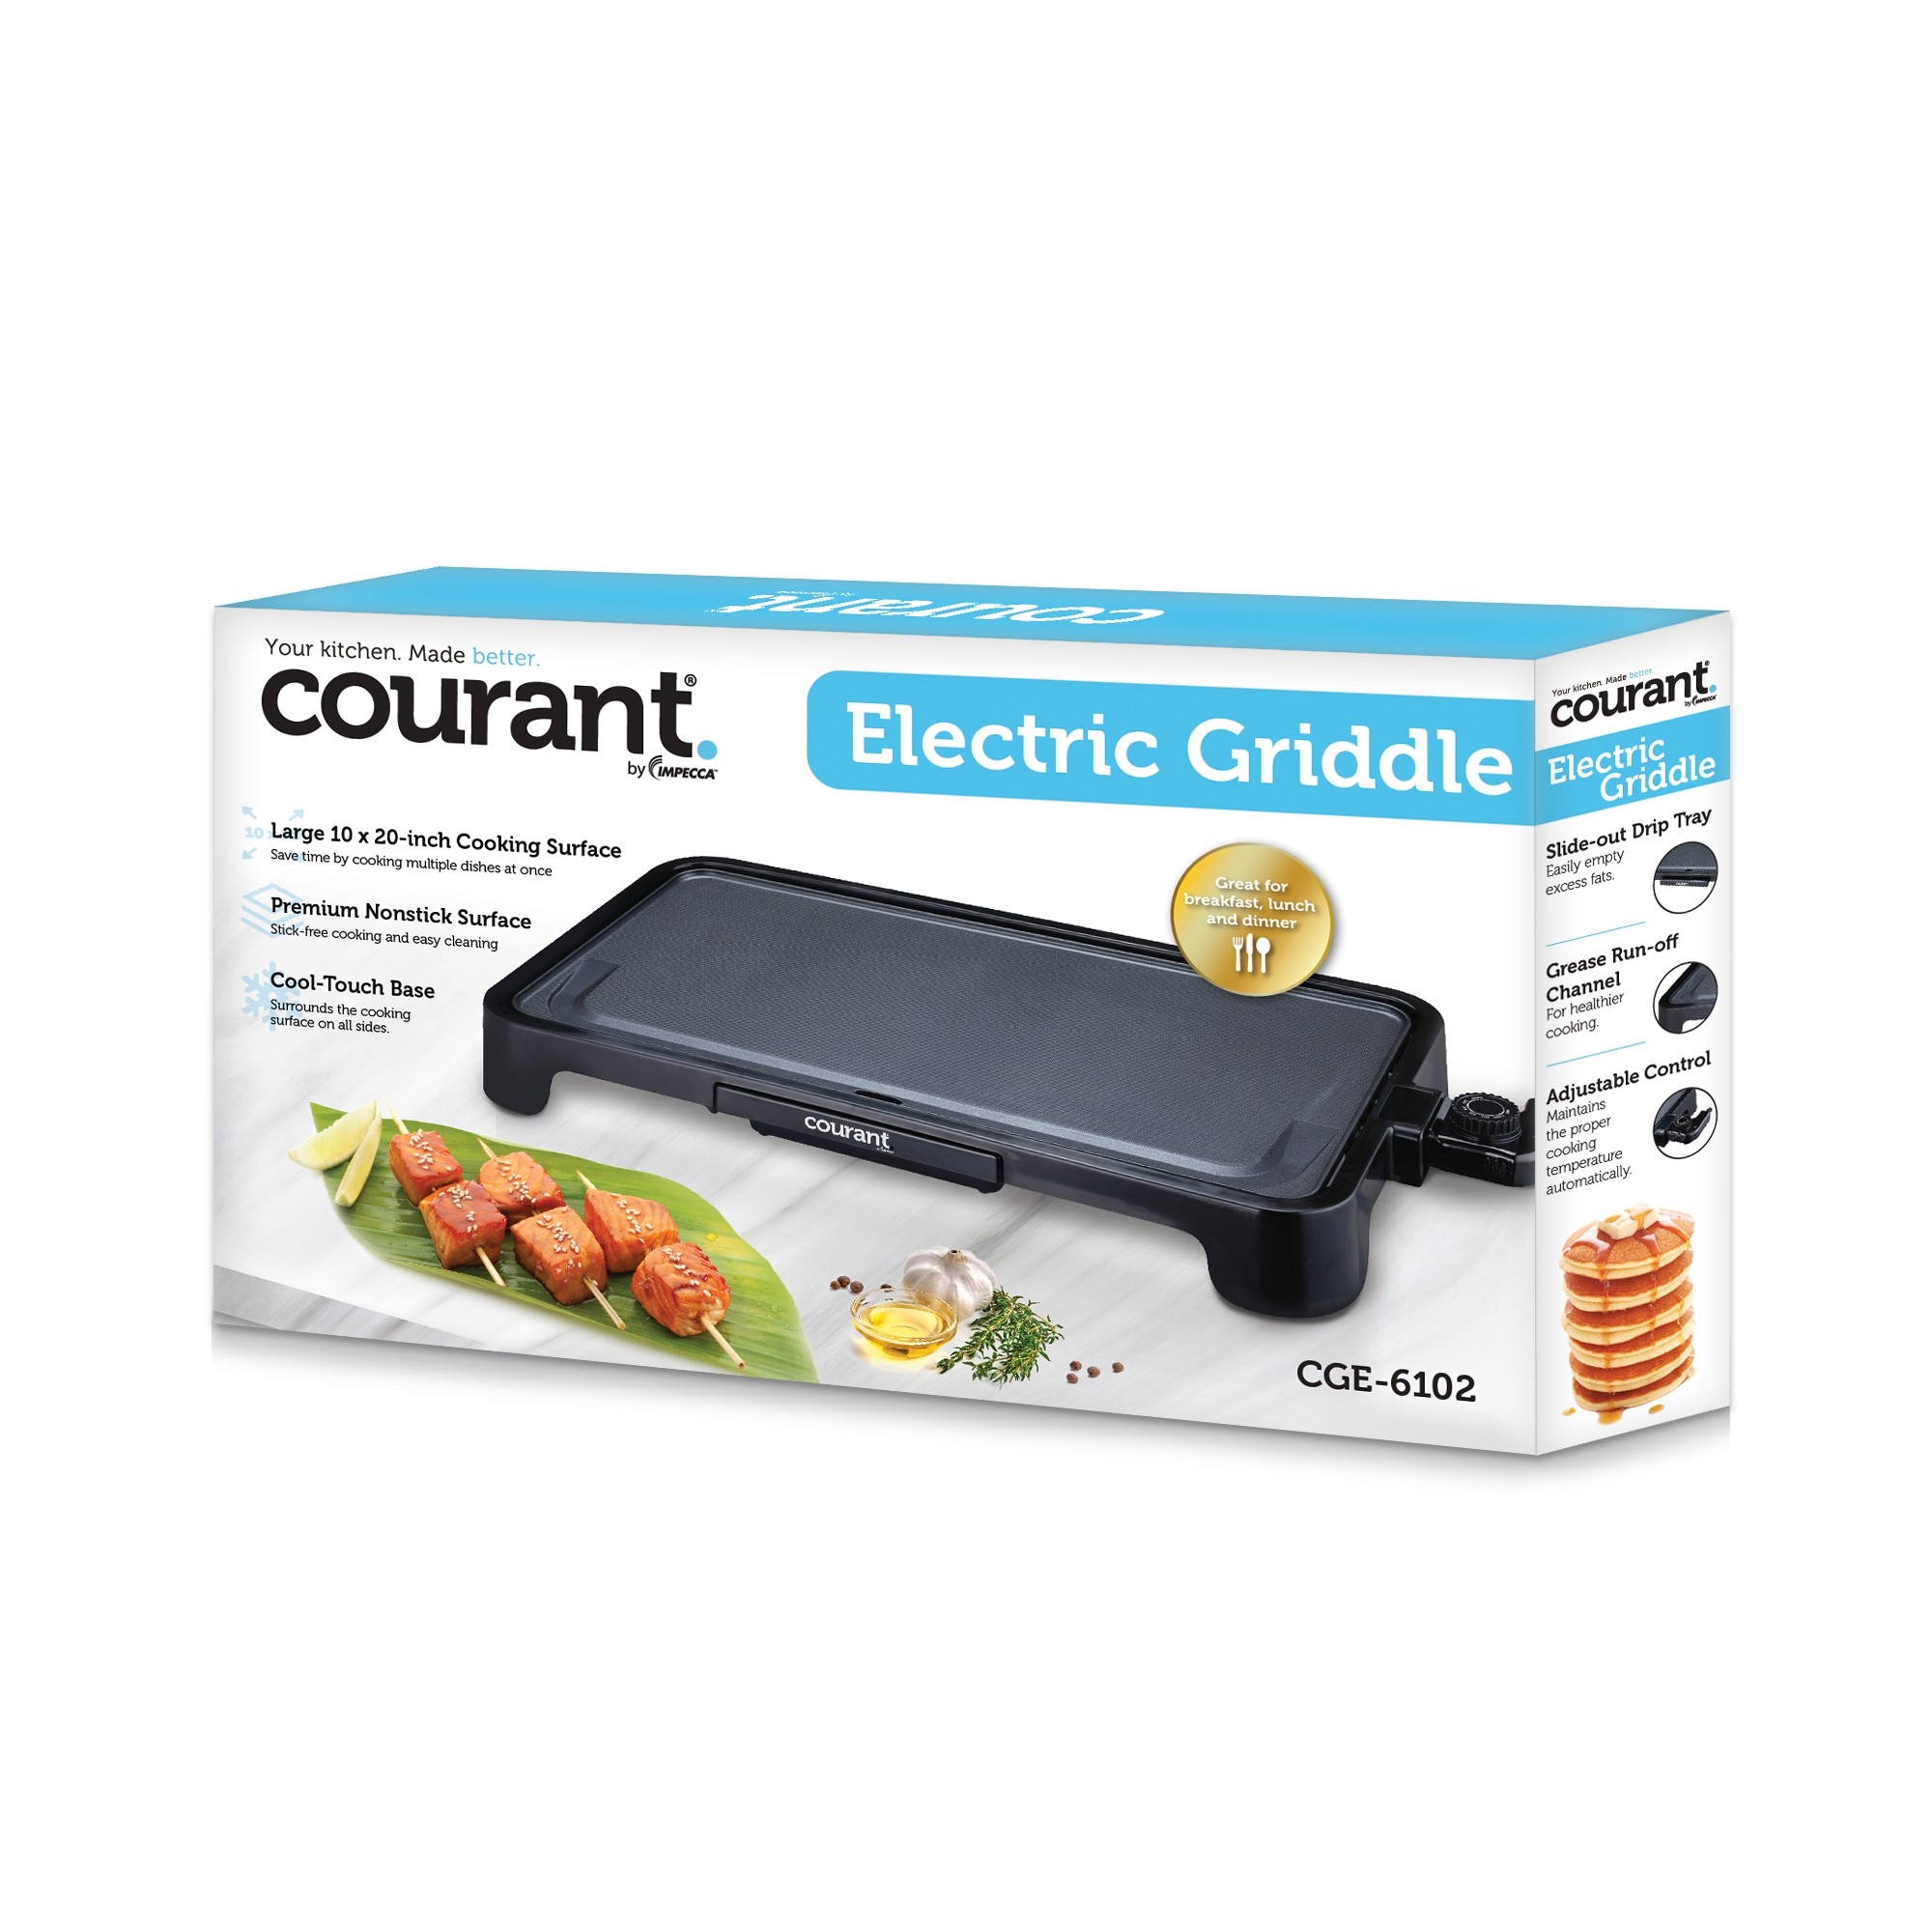 Fixed Plate Electronic Griddle,cool-touch Electronic Griddle,10